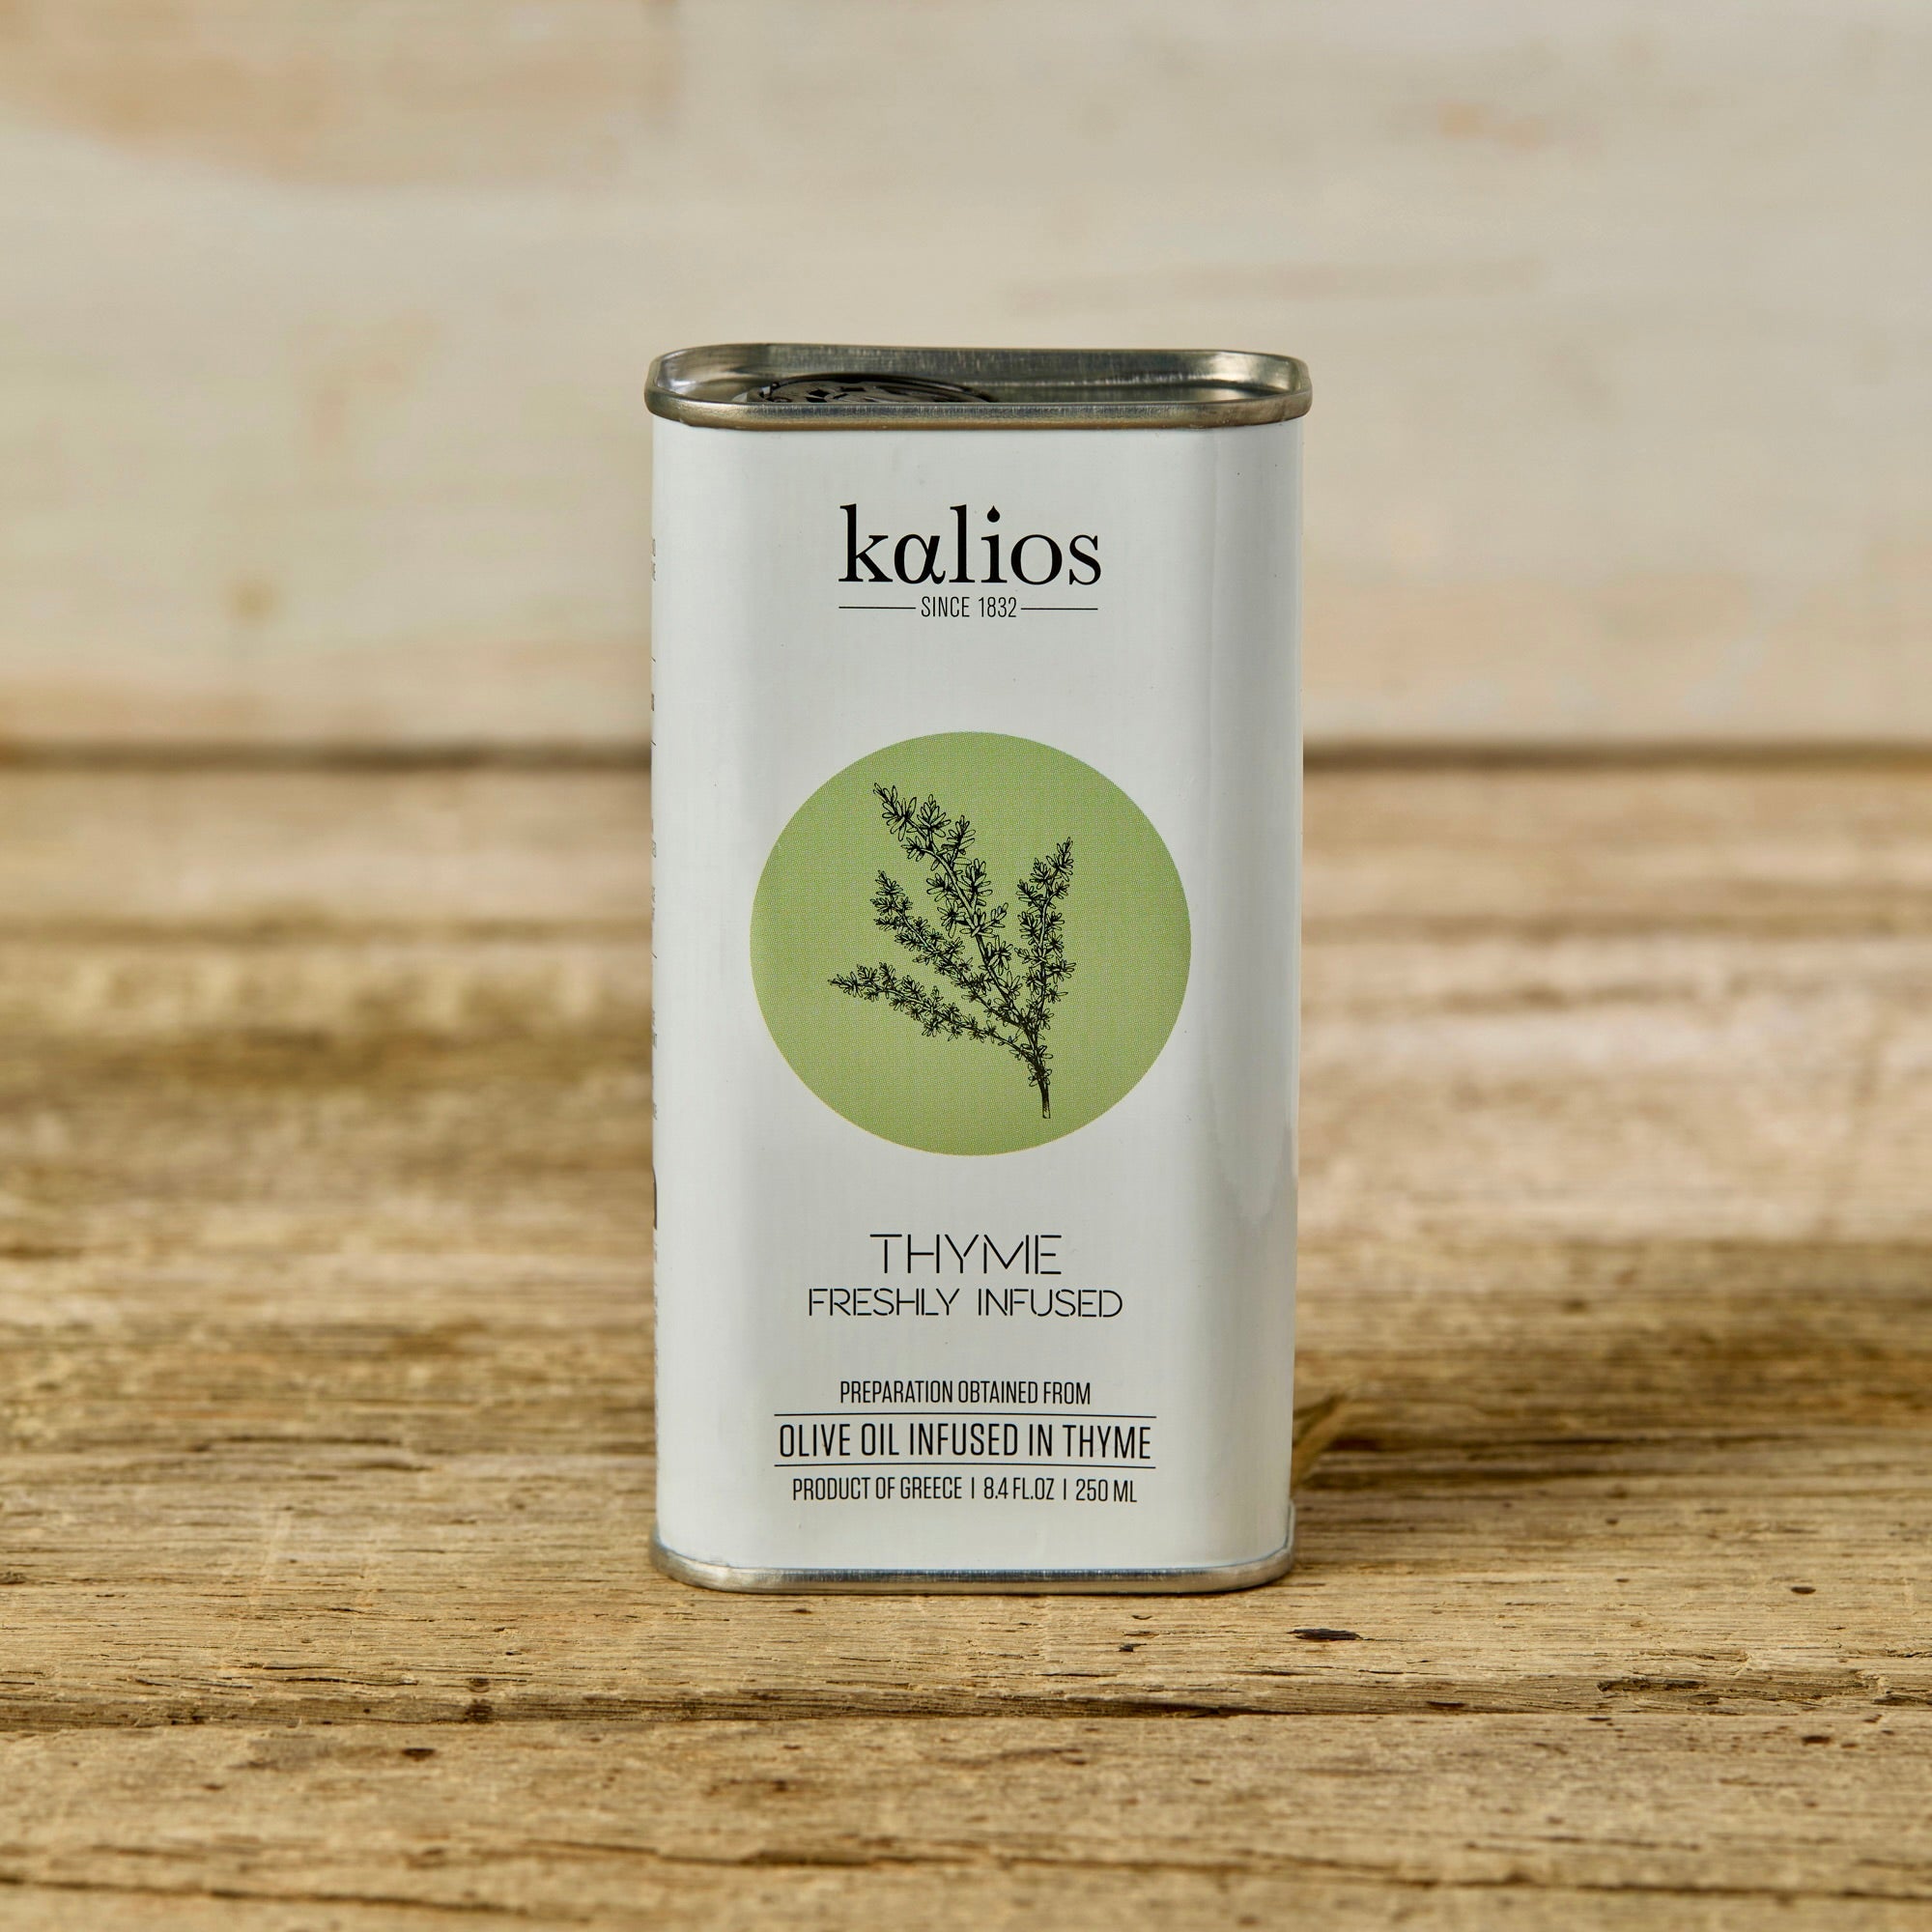 250ml tin of thyme infused olive oil by kalios